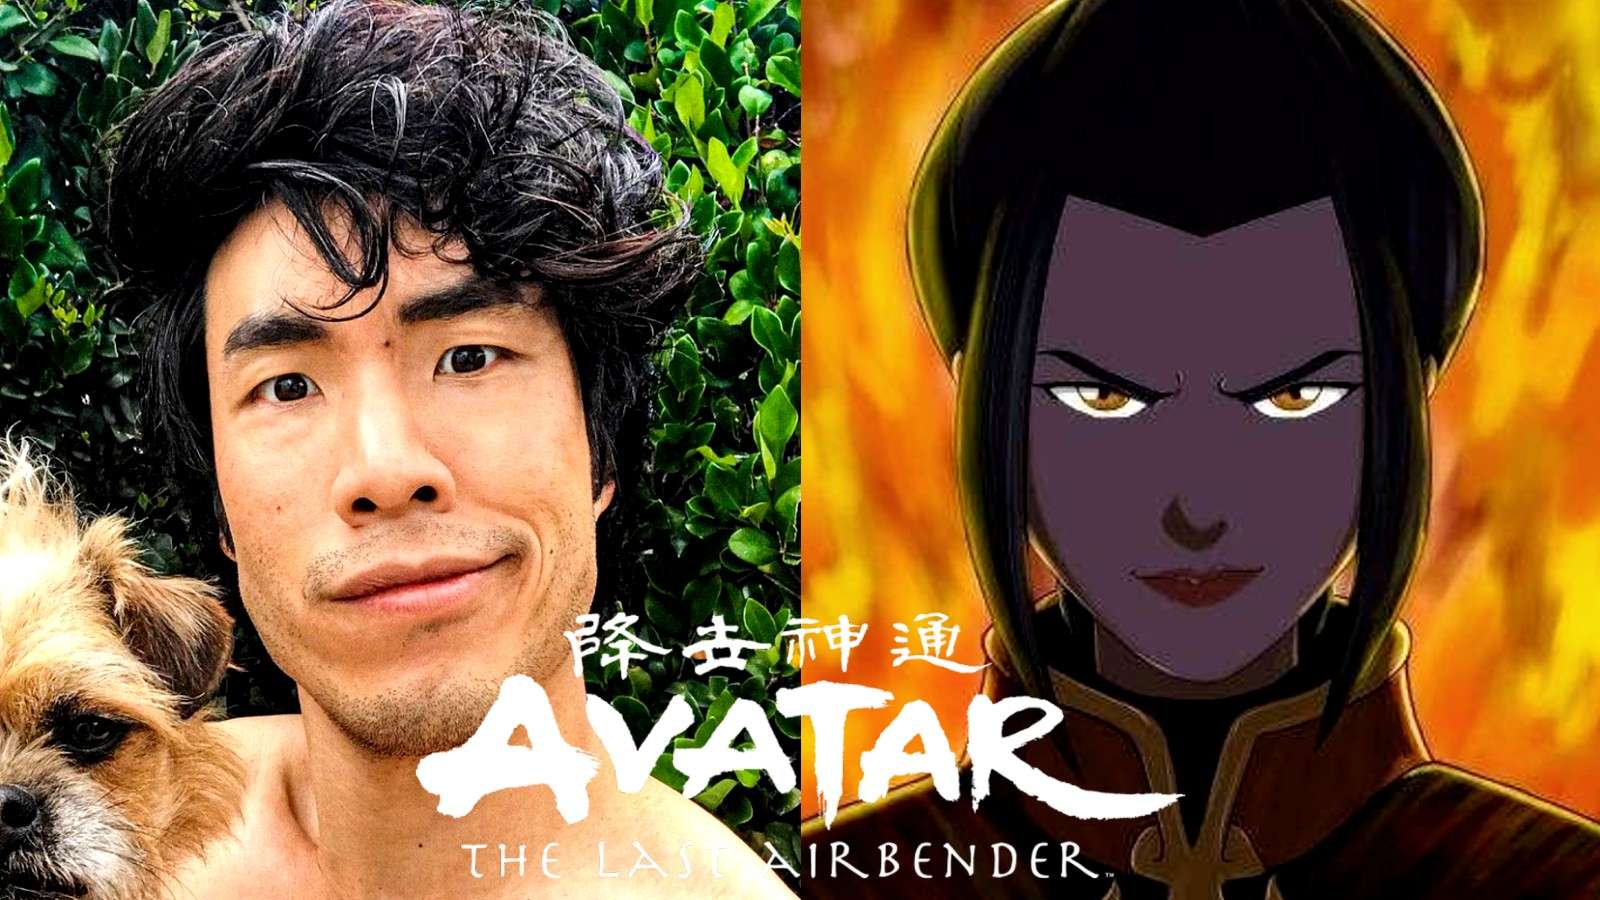 Eugene Lee Yang next to Azula from Avatar: The Last Airbender